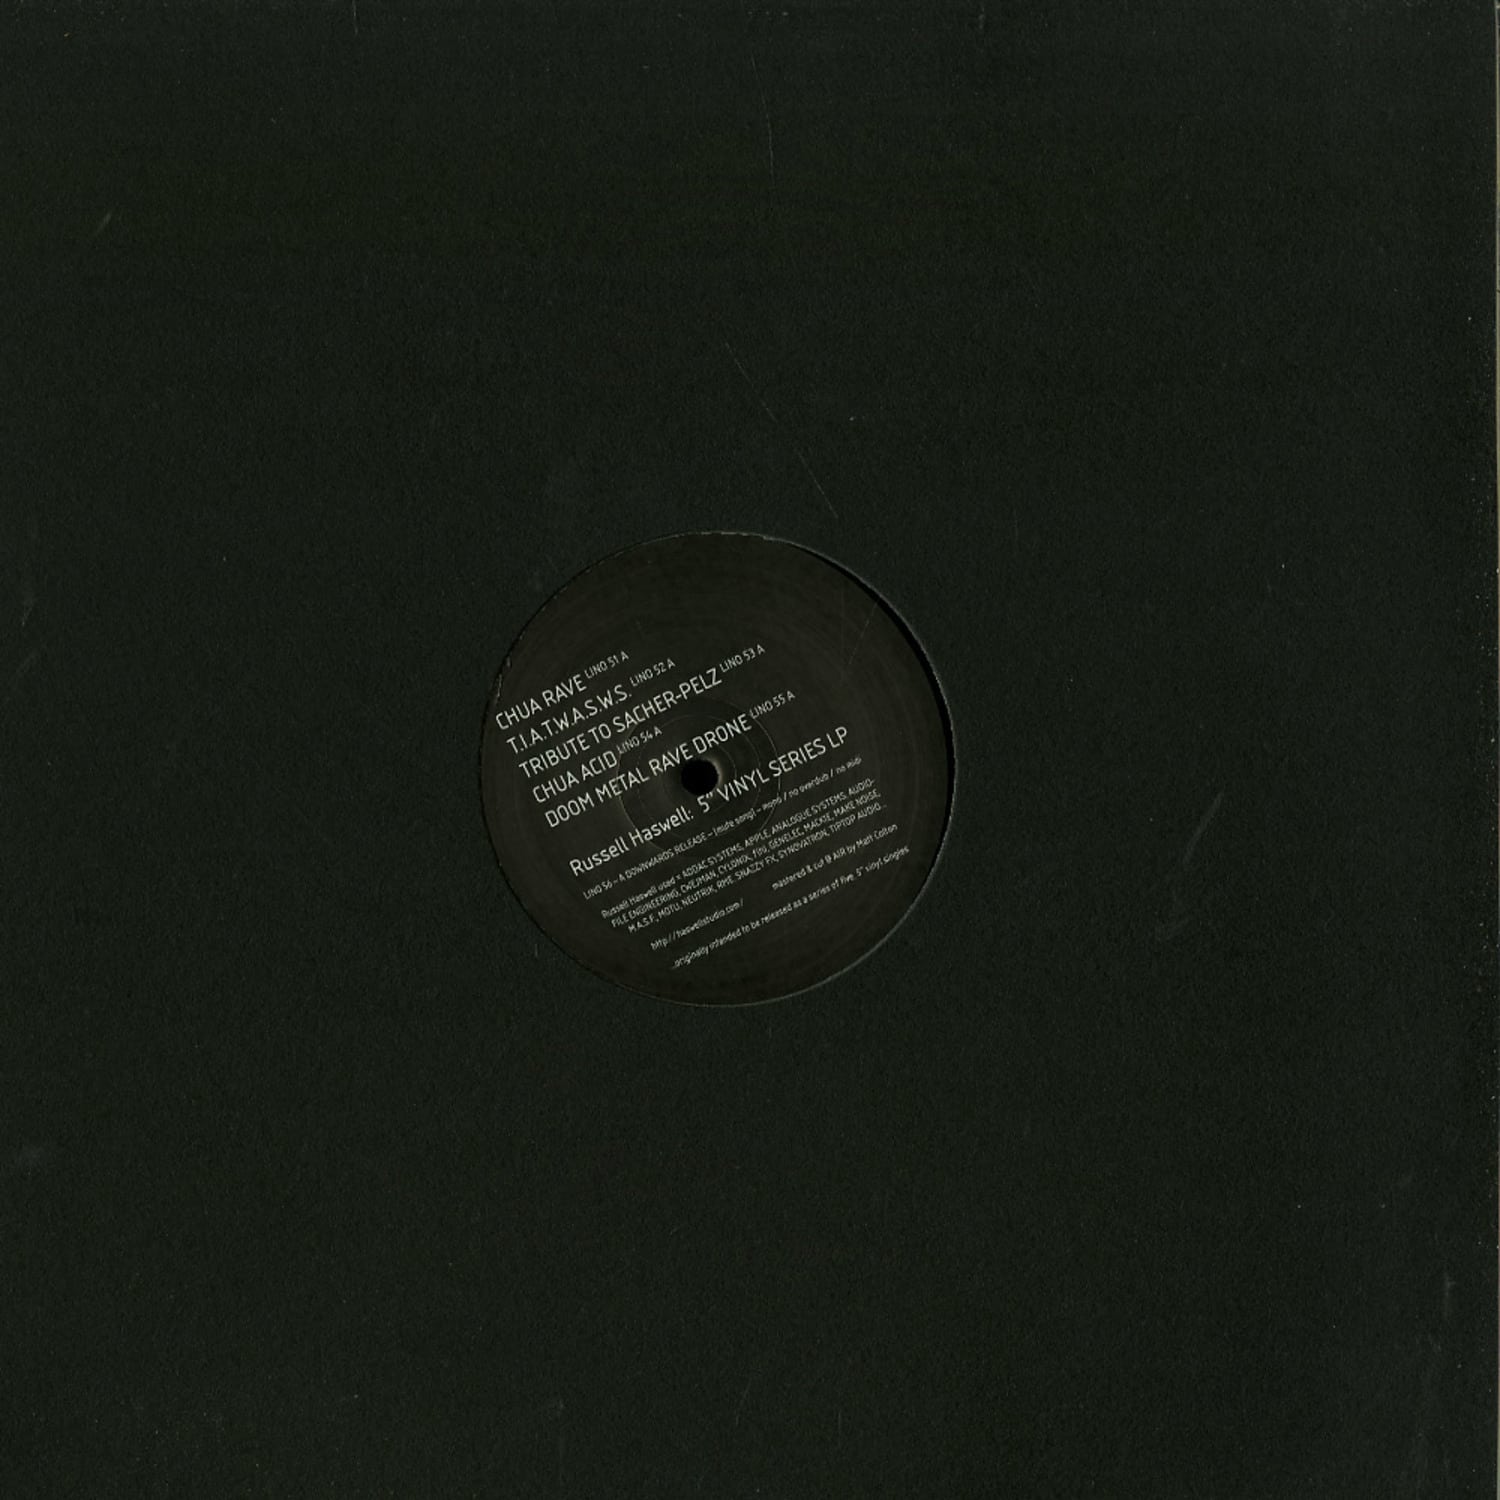 Russel Haswell - 5 INCH VINYL SERIES LP